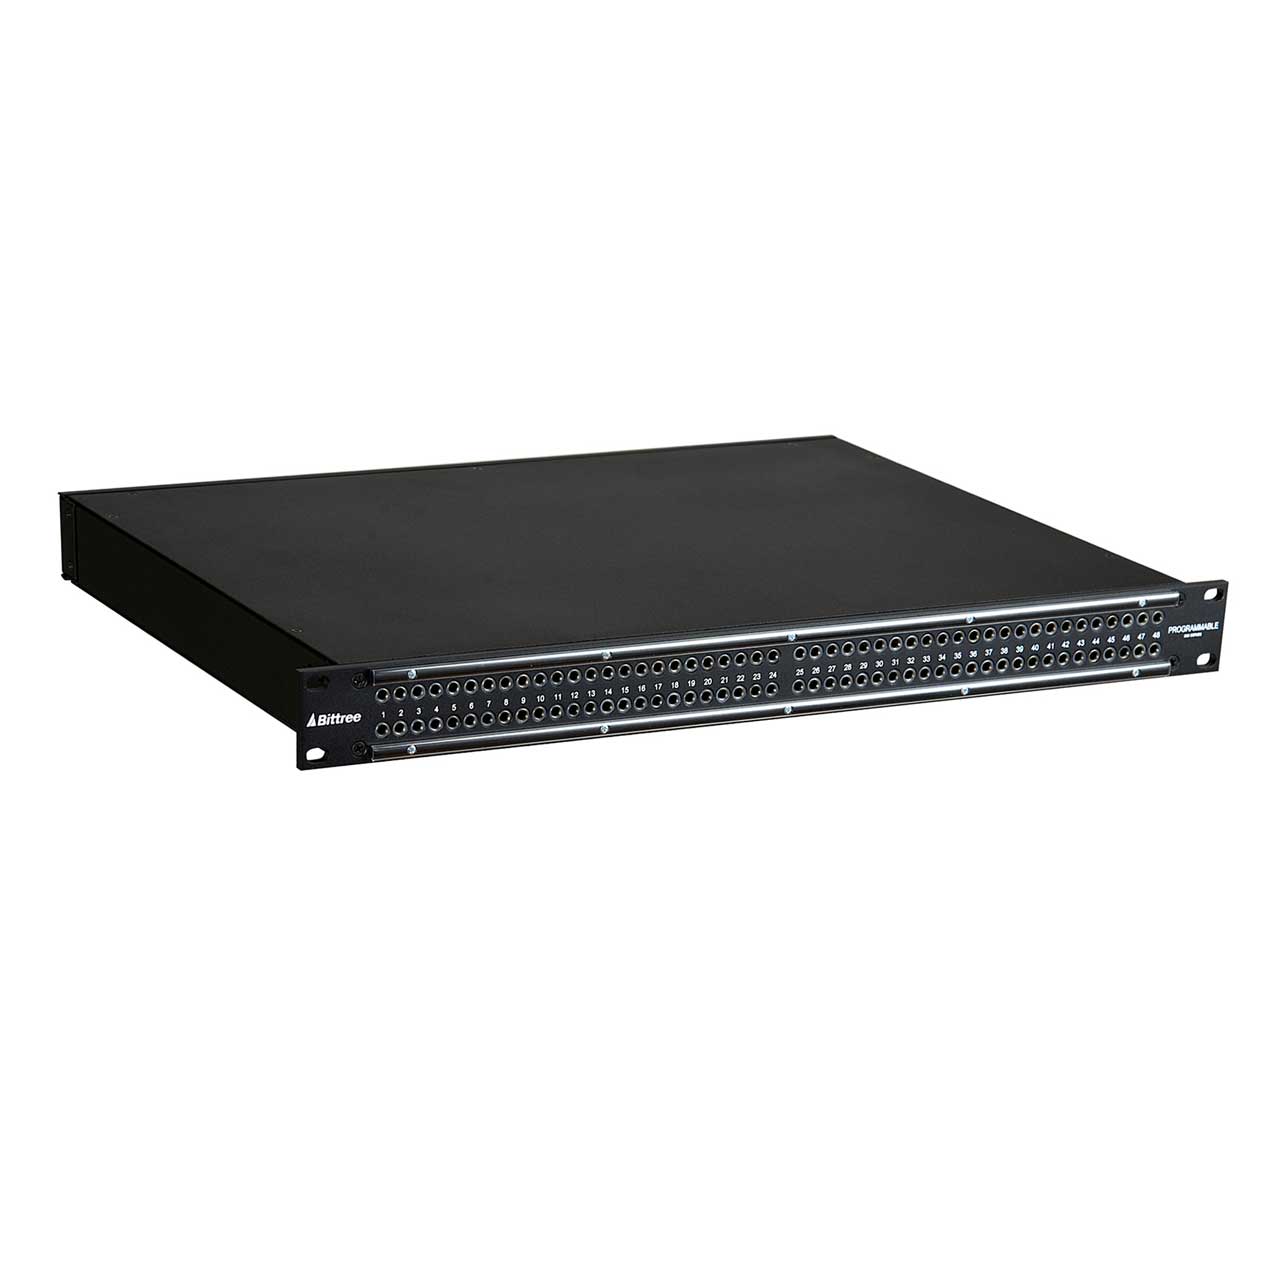 Bittree B96DC-FNRST/E3 M2OU7B 2X48 2RU E3 Full Norm Switched Grounds TT Patchbay 7-Inch